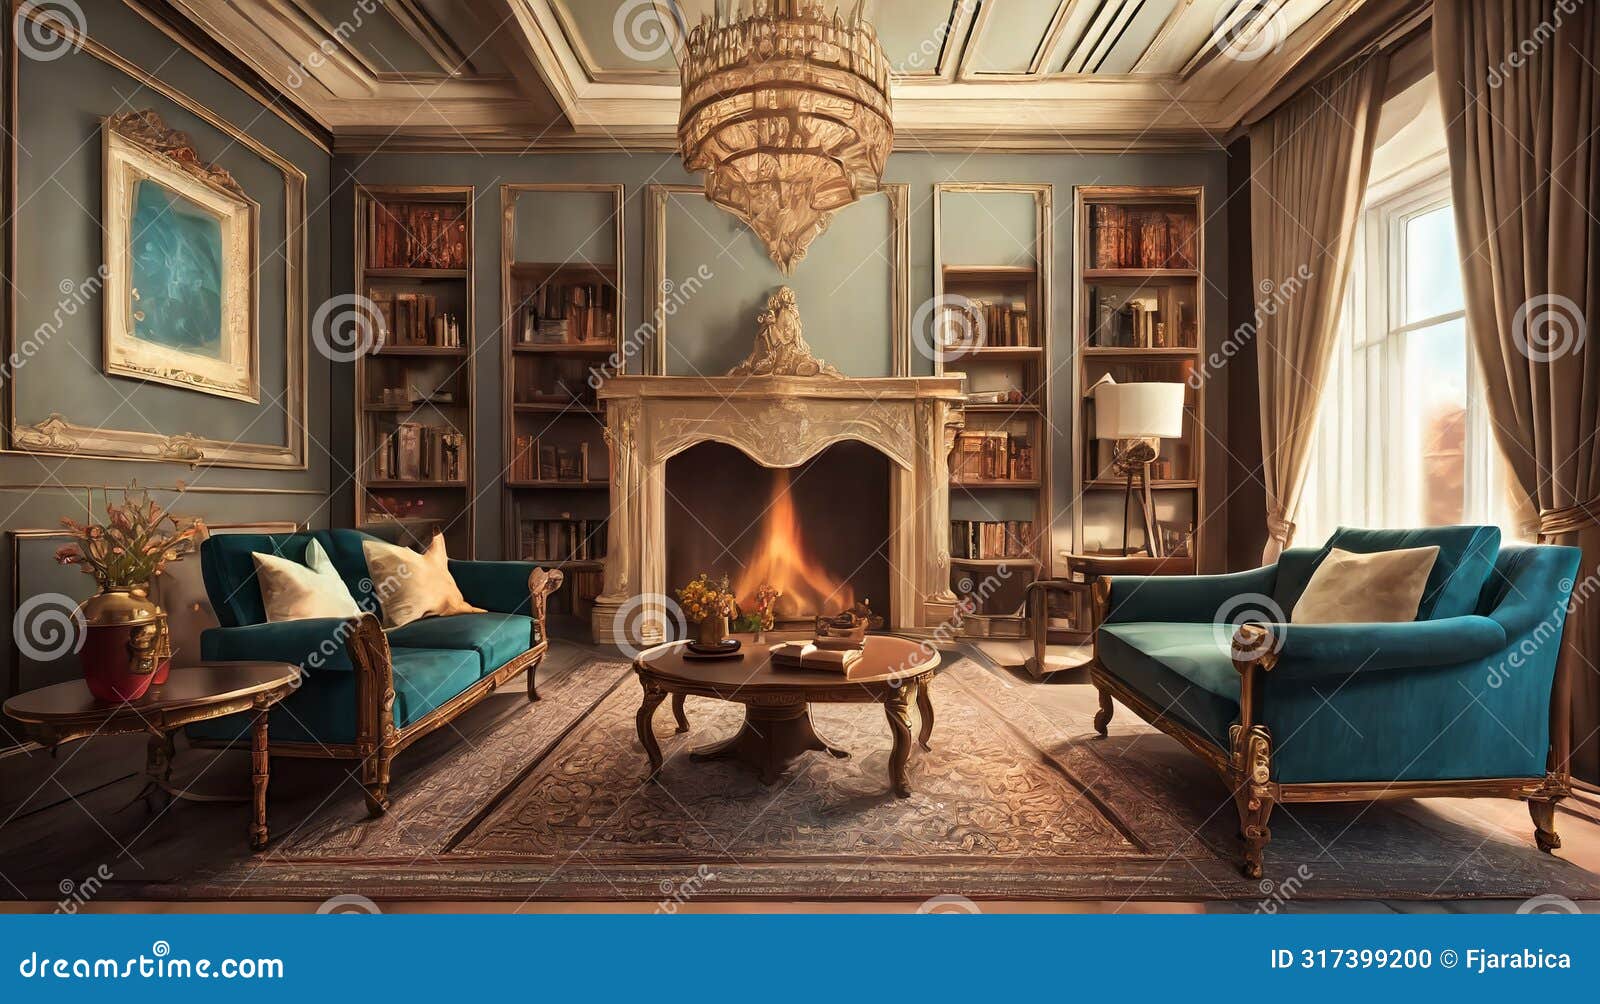 living room with a fireplace and a sofa in the style of romanticism